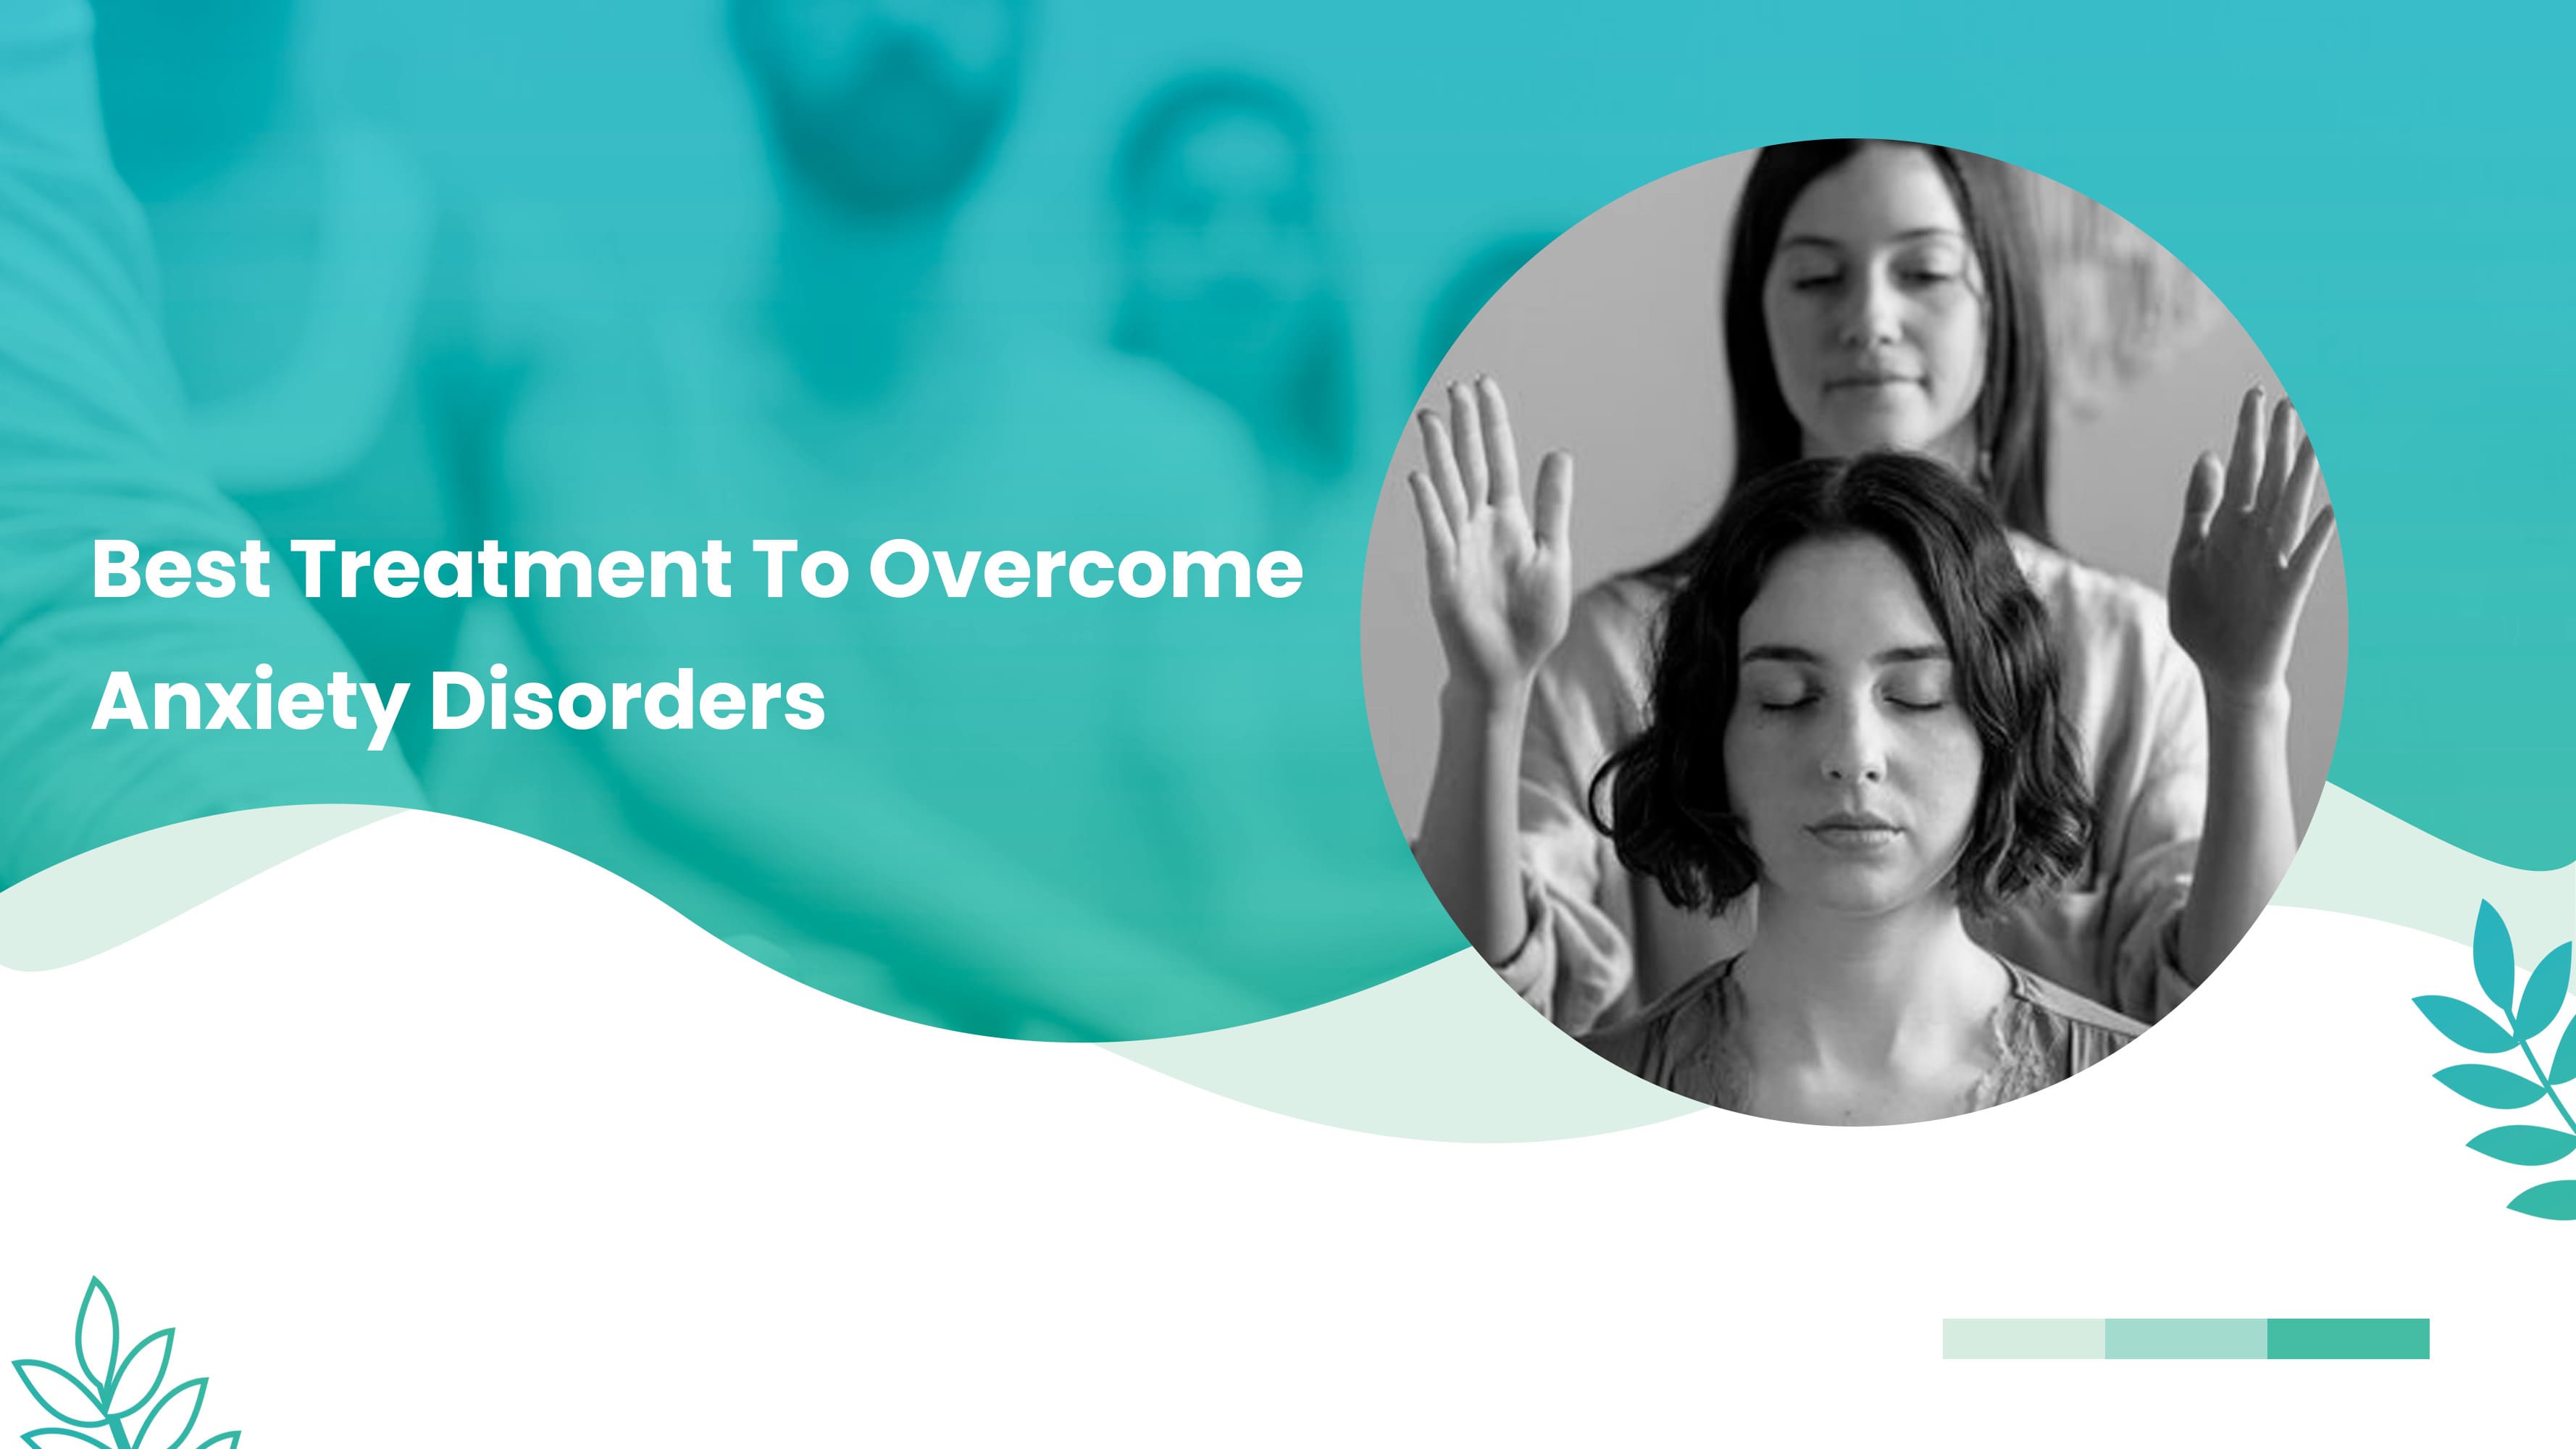 Best Treatment To Overcome Anxiety Disorders